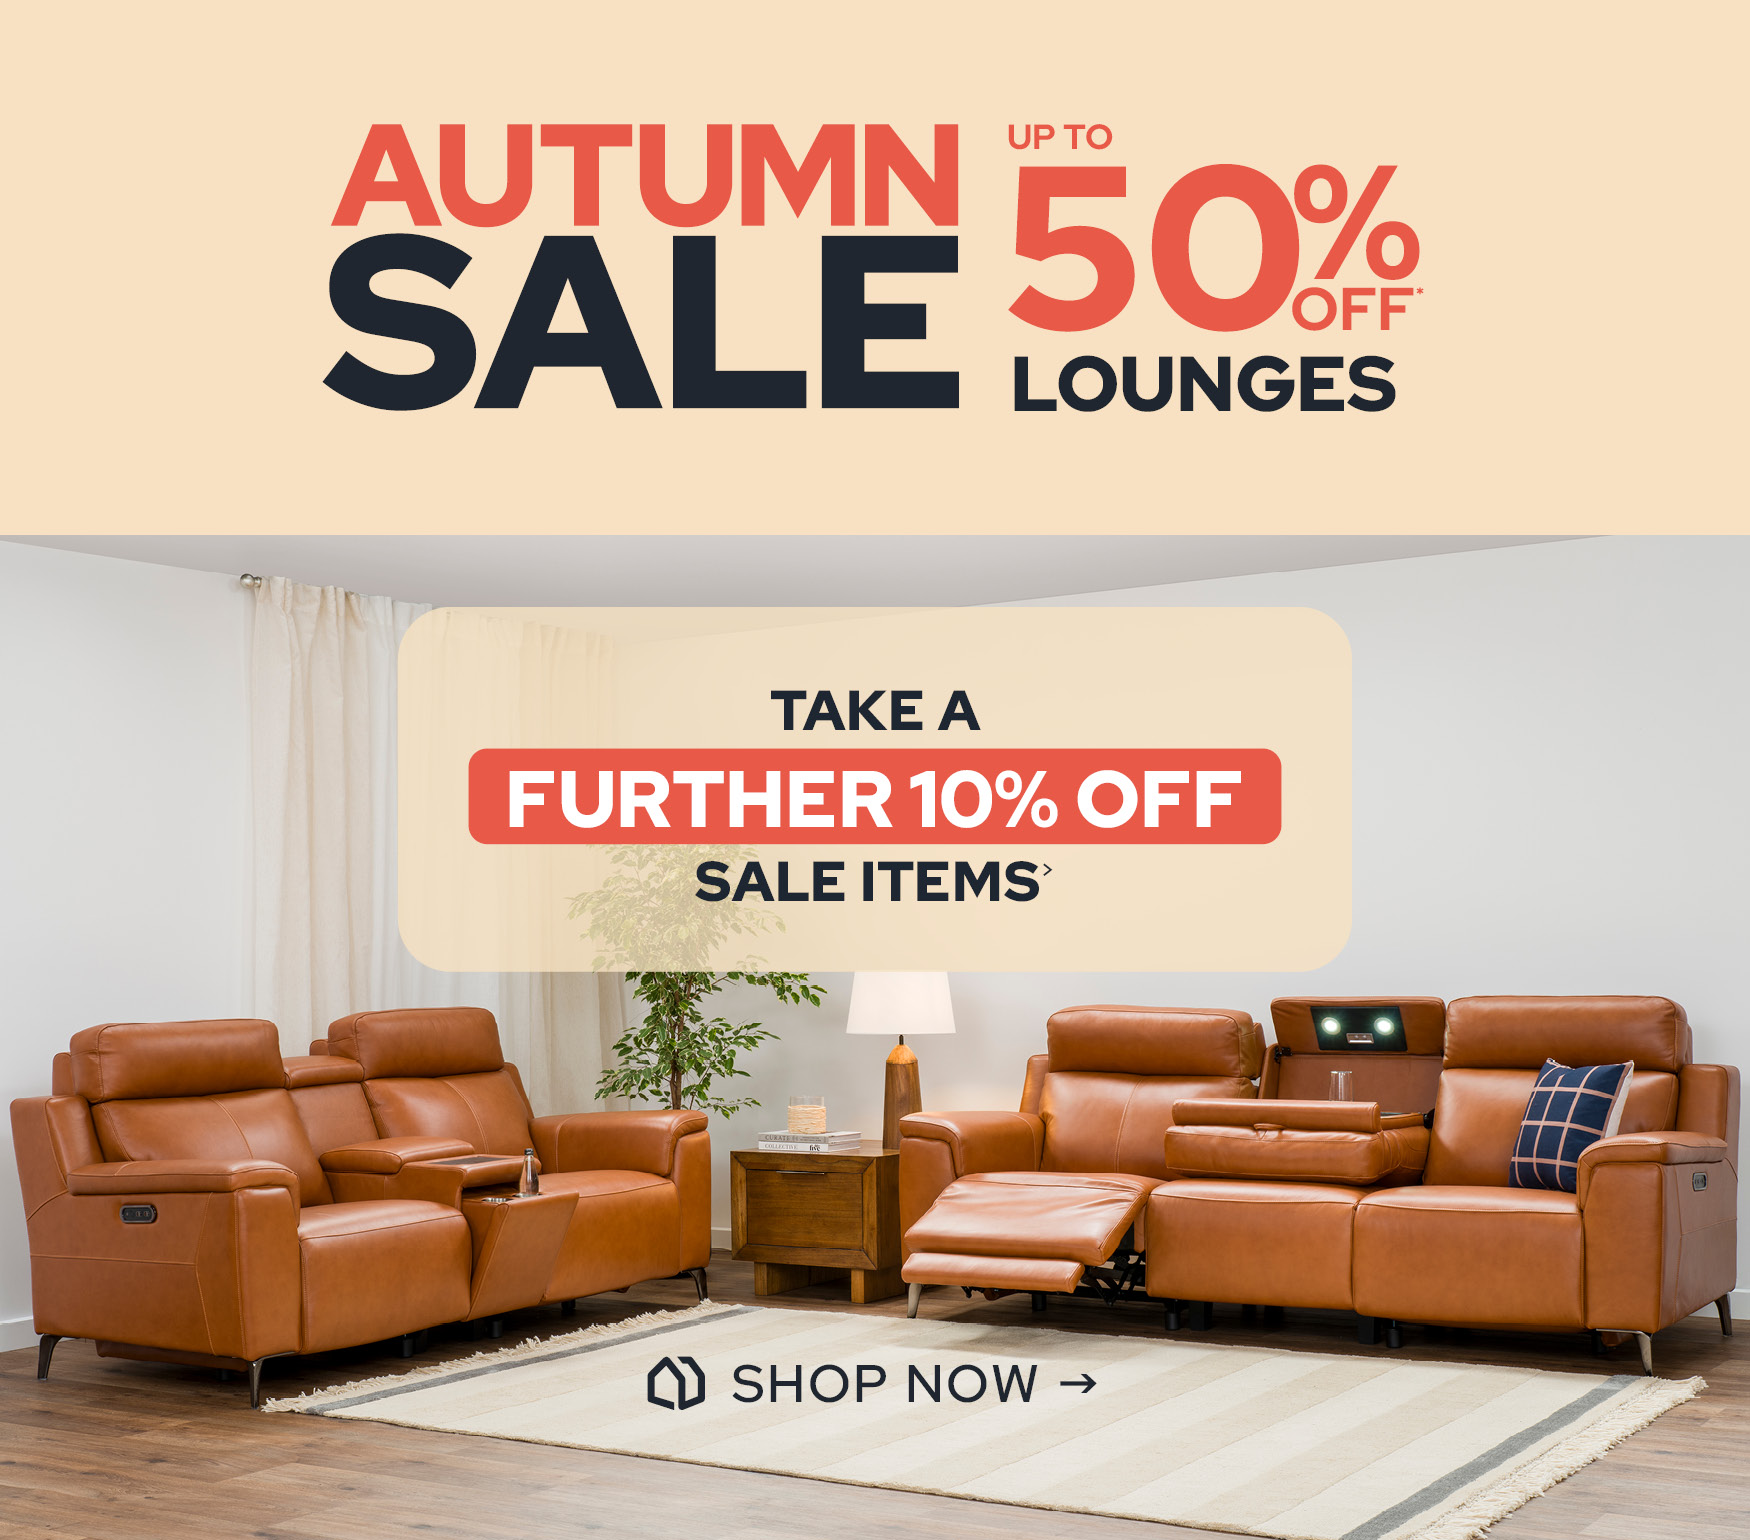 Autumn Sale: Take A Further 10% Off> Lounges & Sofas